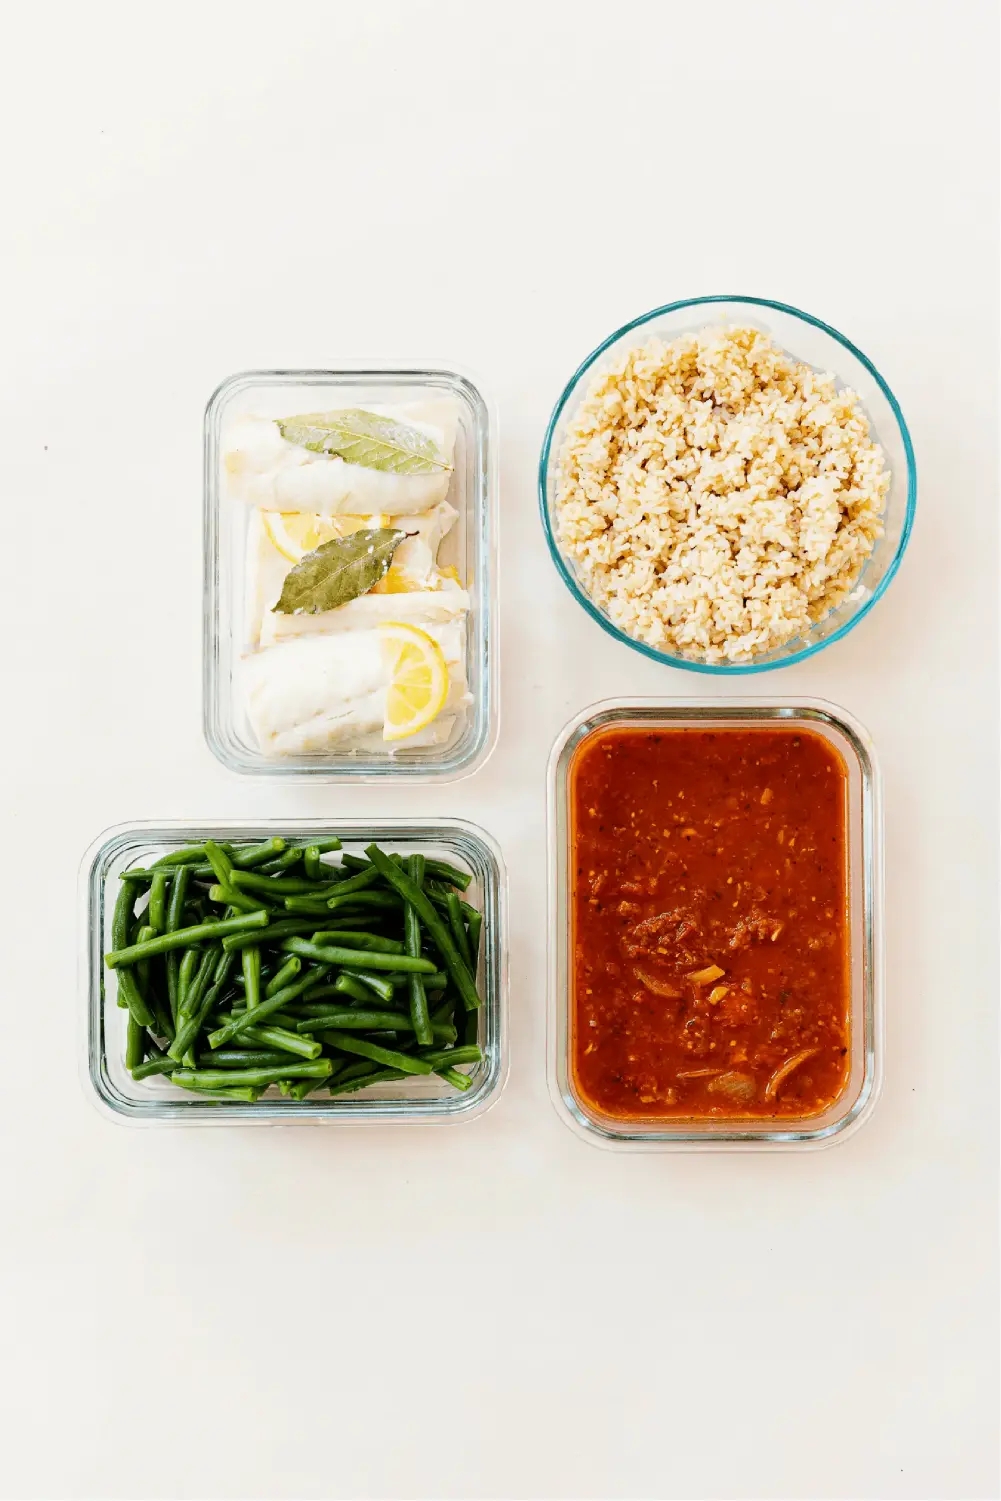 Glass dishes filled with fish, rice, sauce and green beans. Each item is in a separate container. The photo is from an overhead view with a white background.